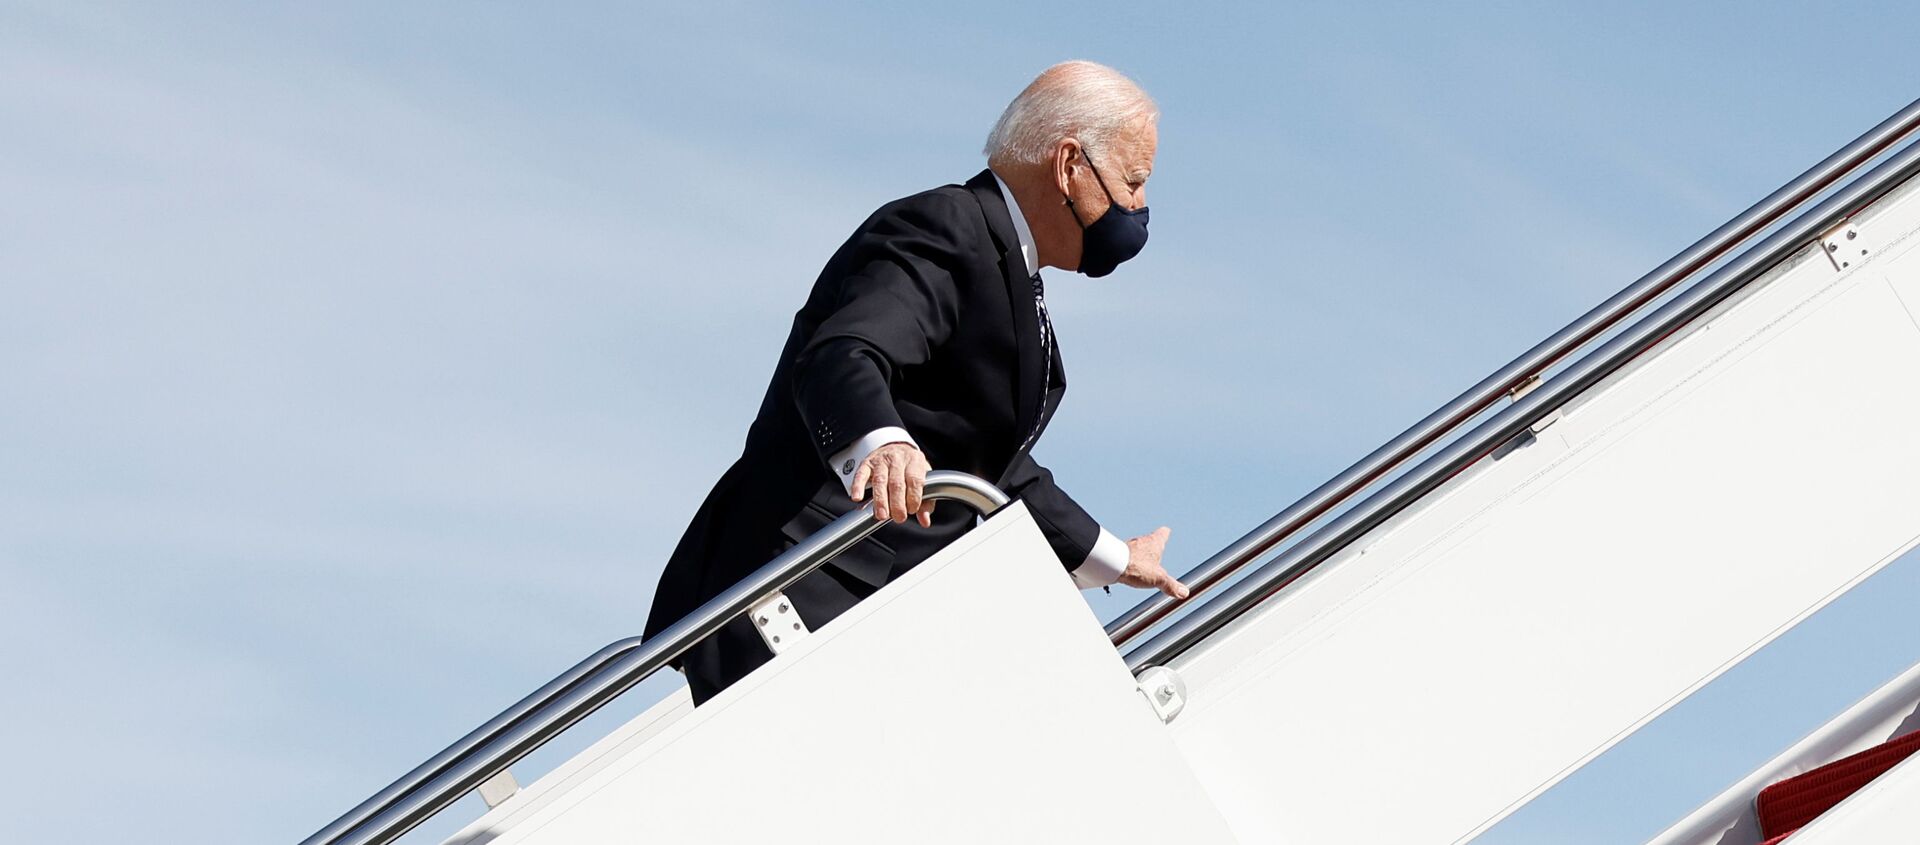 U.S. President Joe Biden grabs onto the railing after he stumbled while boarding Air Force One as he departs Washington on travel to Atlanta, Georgia to promote the $1.9 trillion coronavirus disease (COVID-19) aid package known as the American Rescue Plan, at Joint Base Andrews, Maryland, U.S., March 19, 2021. - Sputnik International, 1920, 19.03.2021